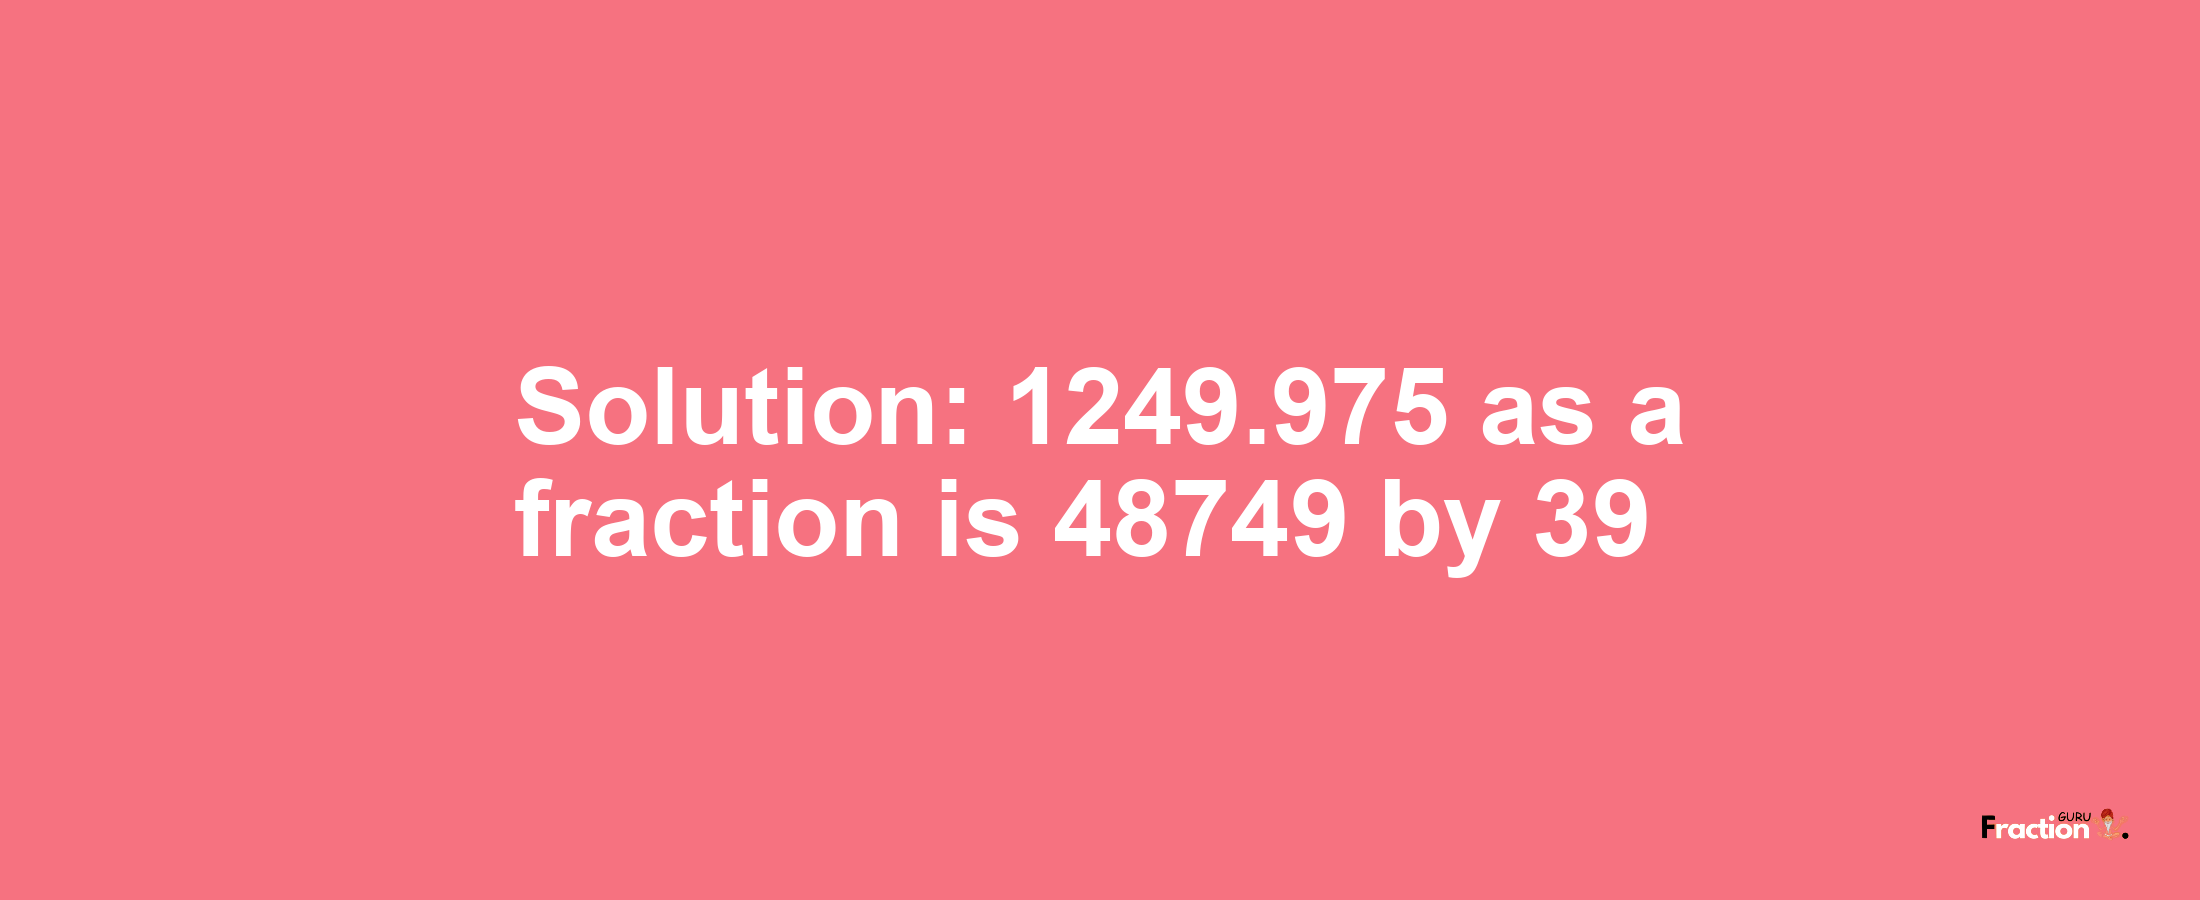 Solution:1249.975 as a fraction is 48749/39